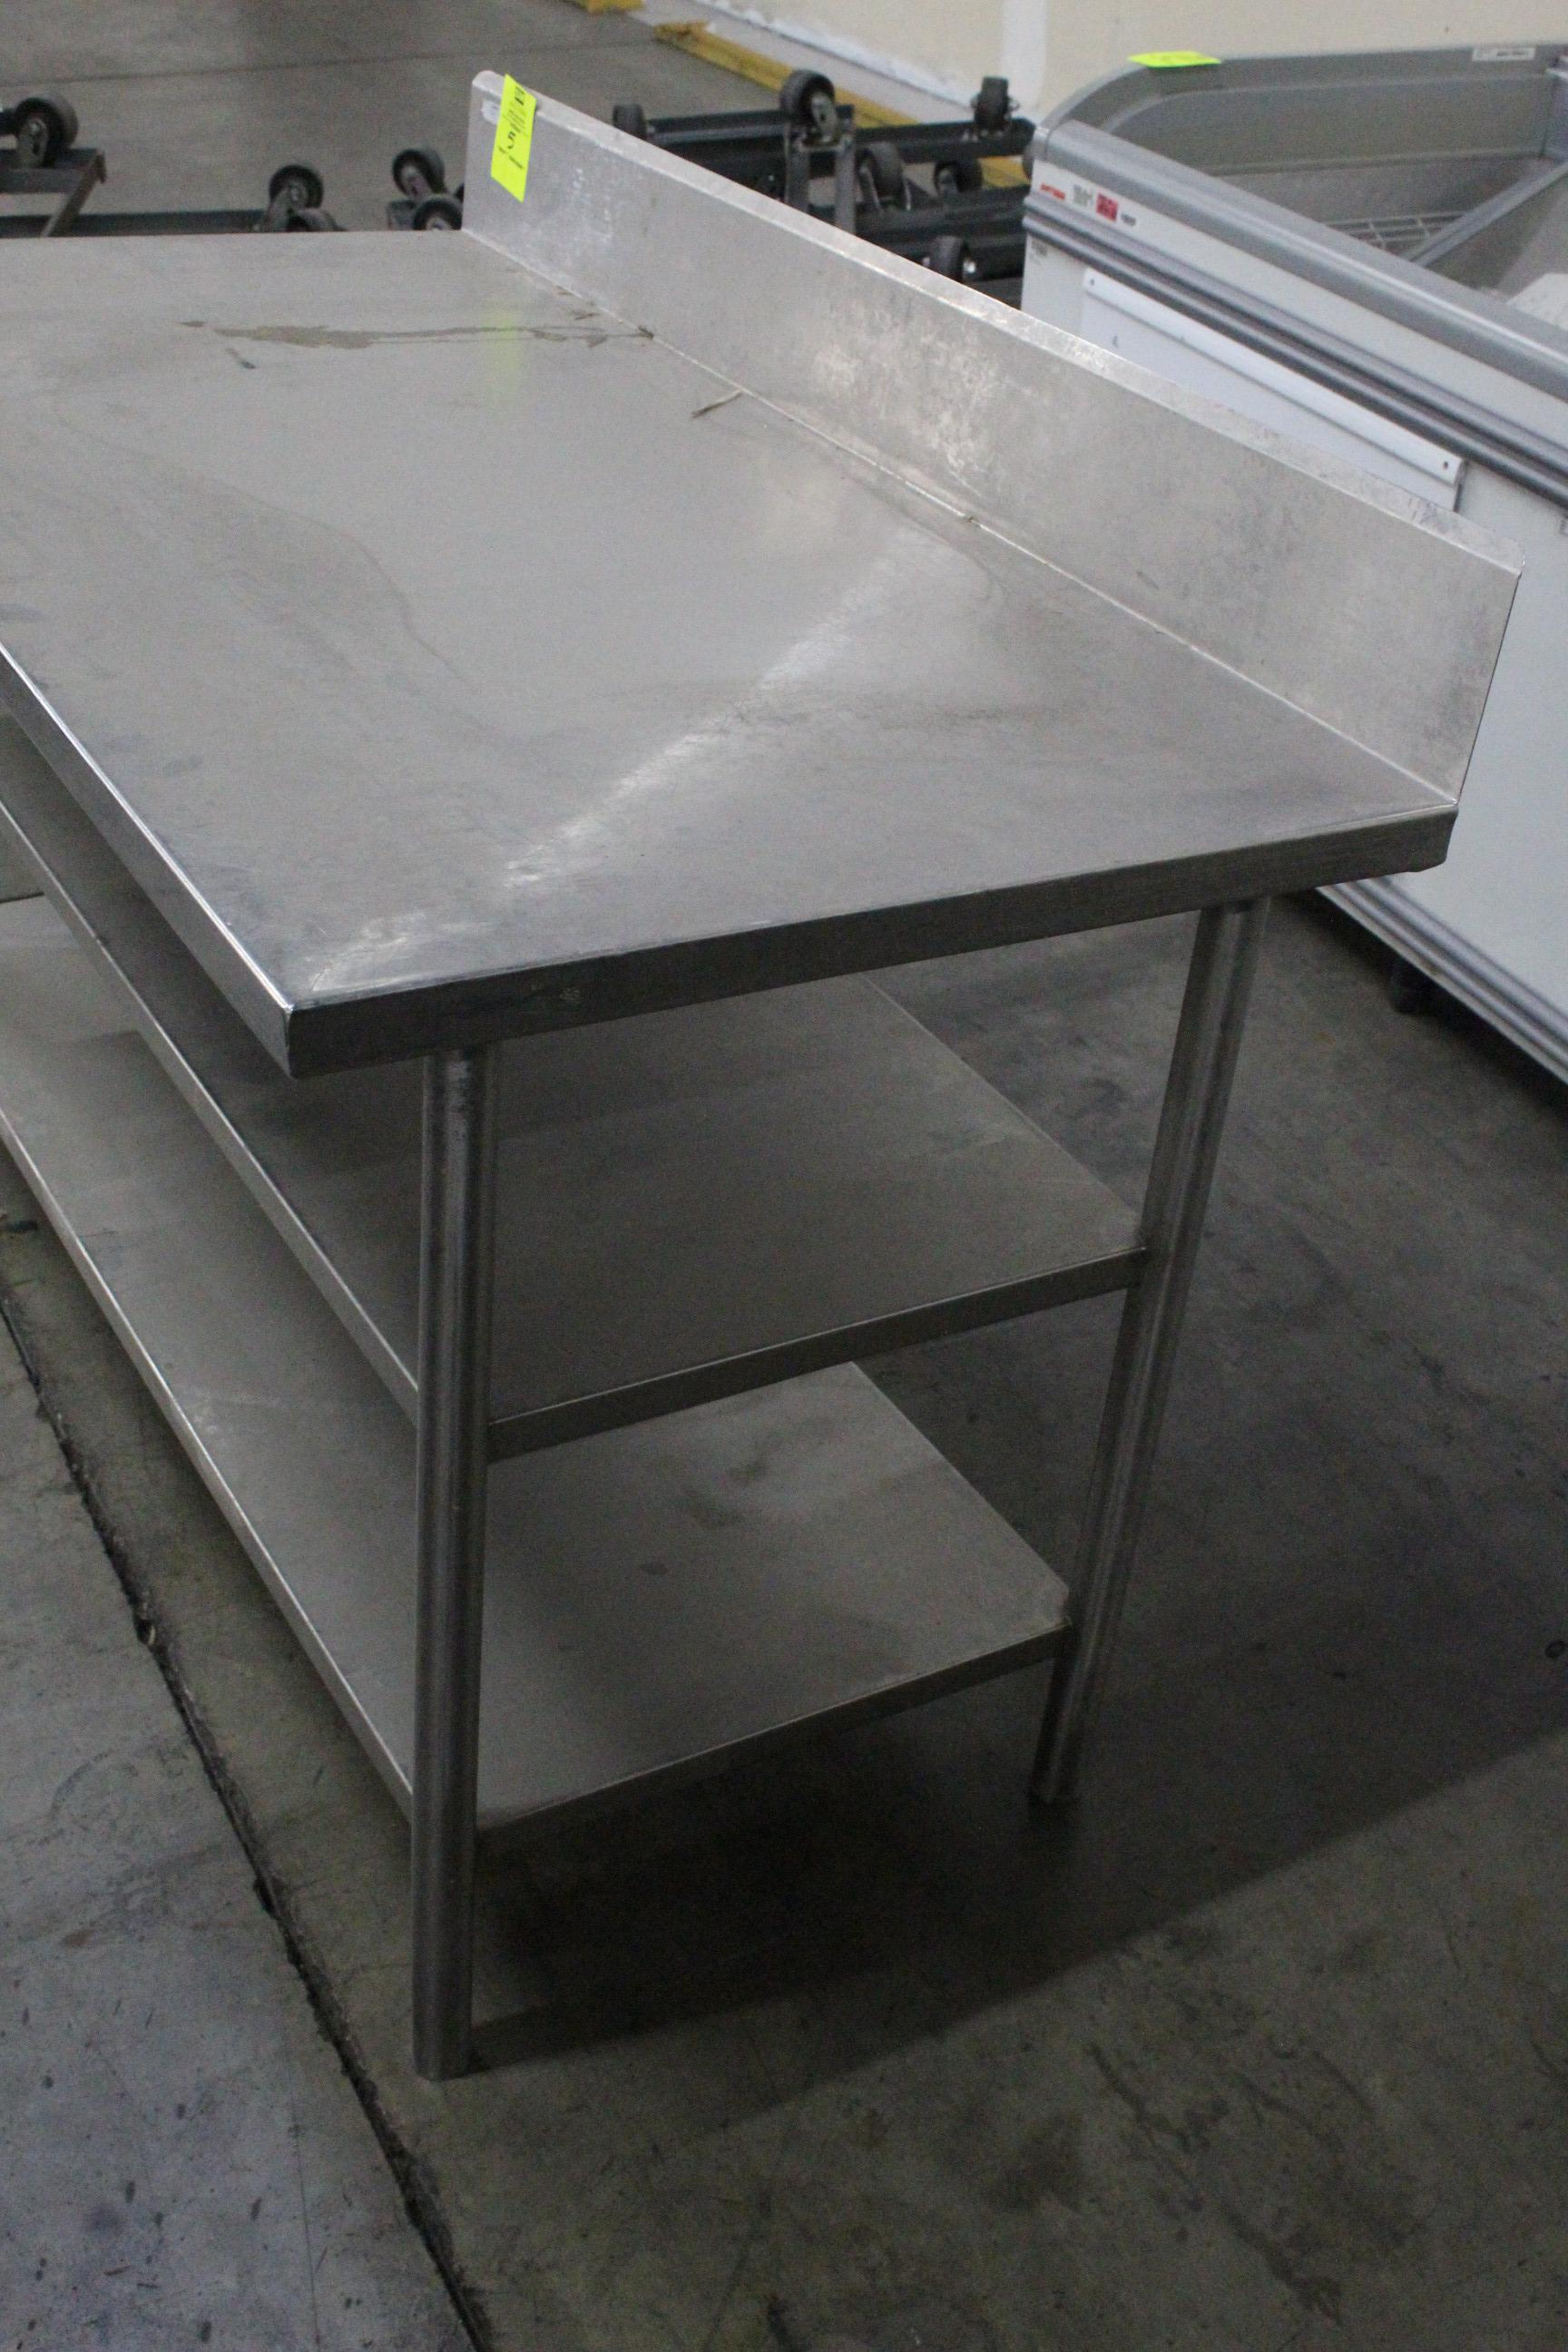 5' Stainless Steel Table W/ Two Undershelves